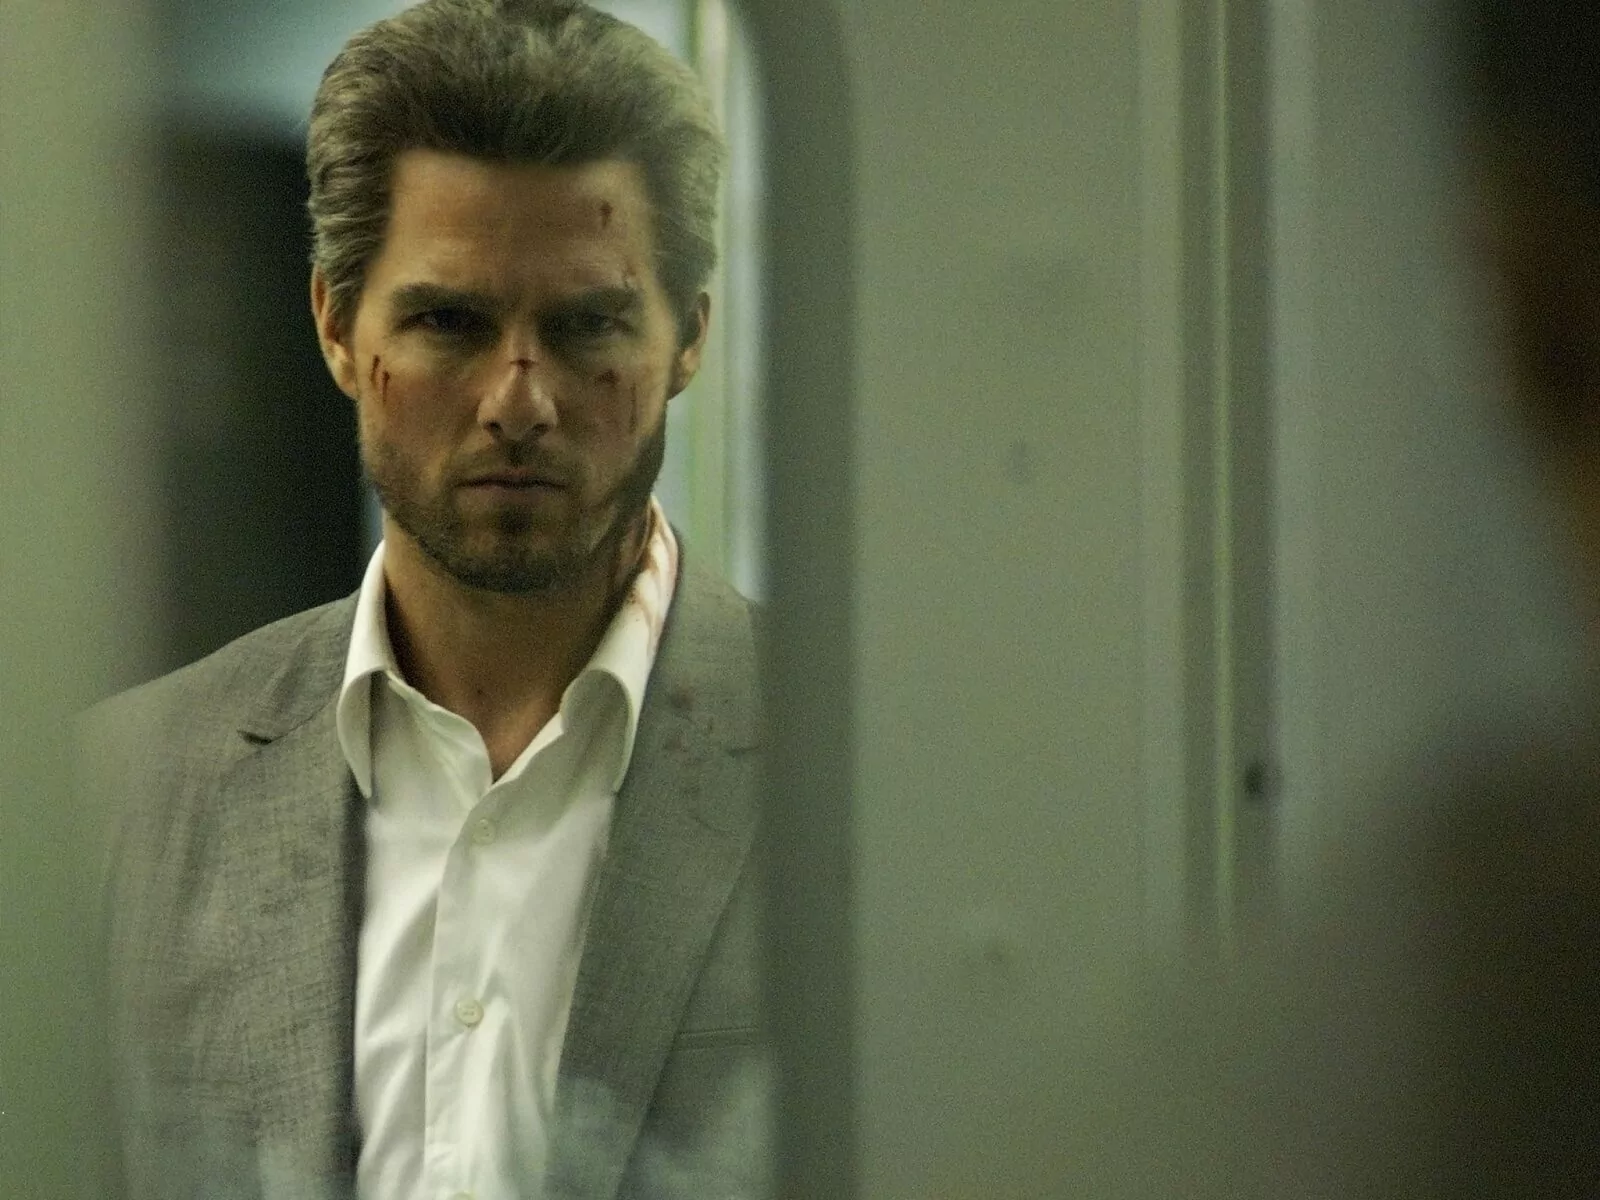 Collateral - Far from being a generic Tom Cruise hitman movie